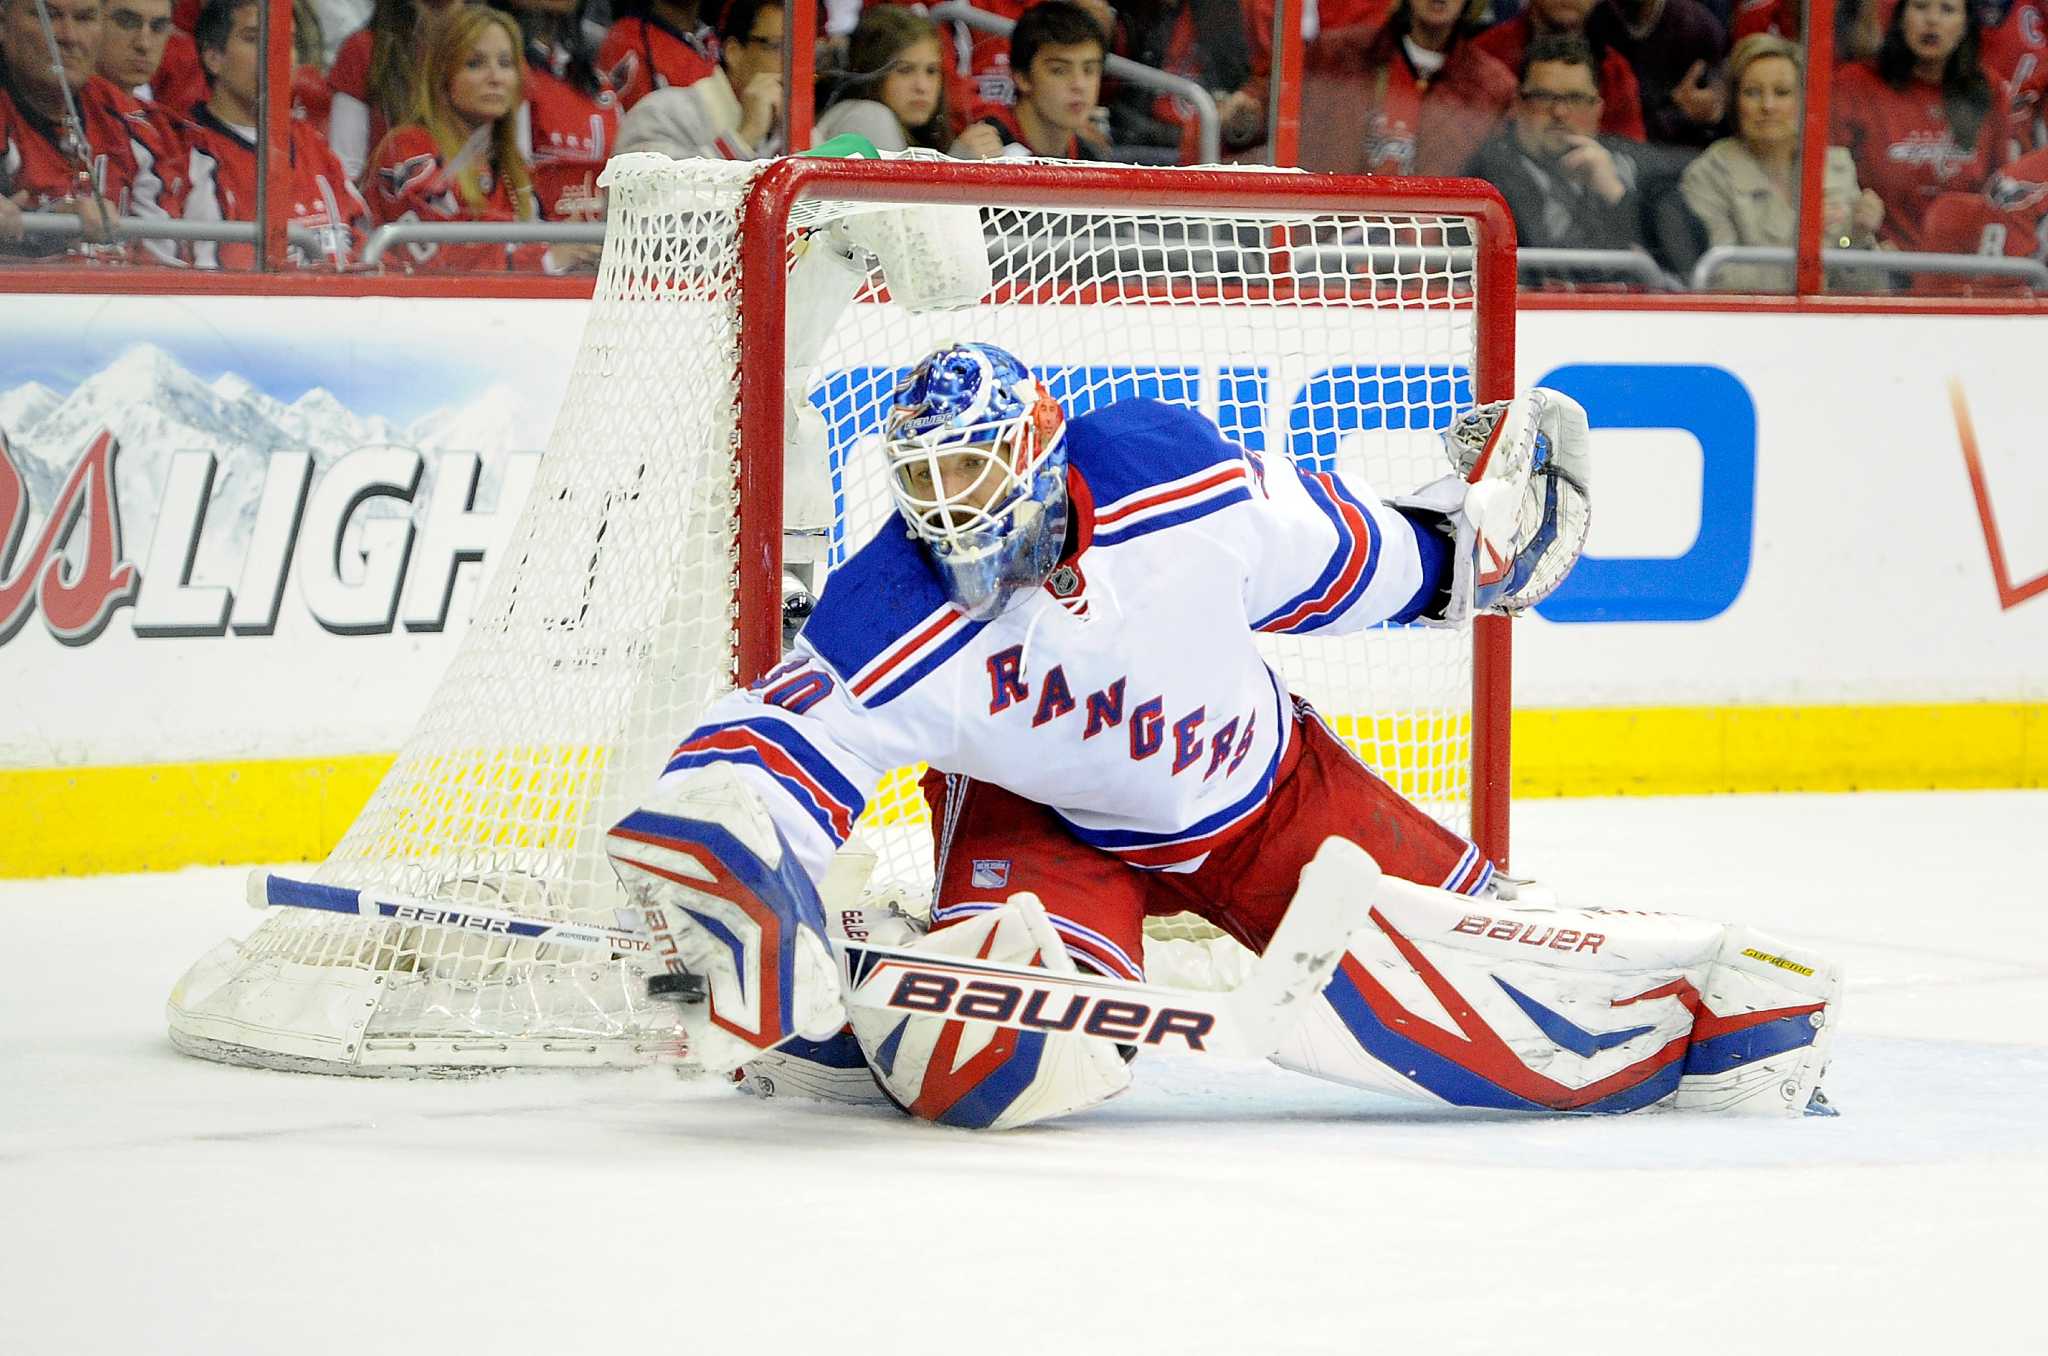 Henrik Lundqvist can't save New York Rangers from elimination